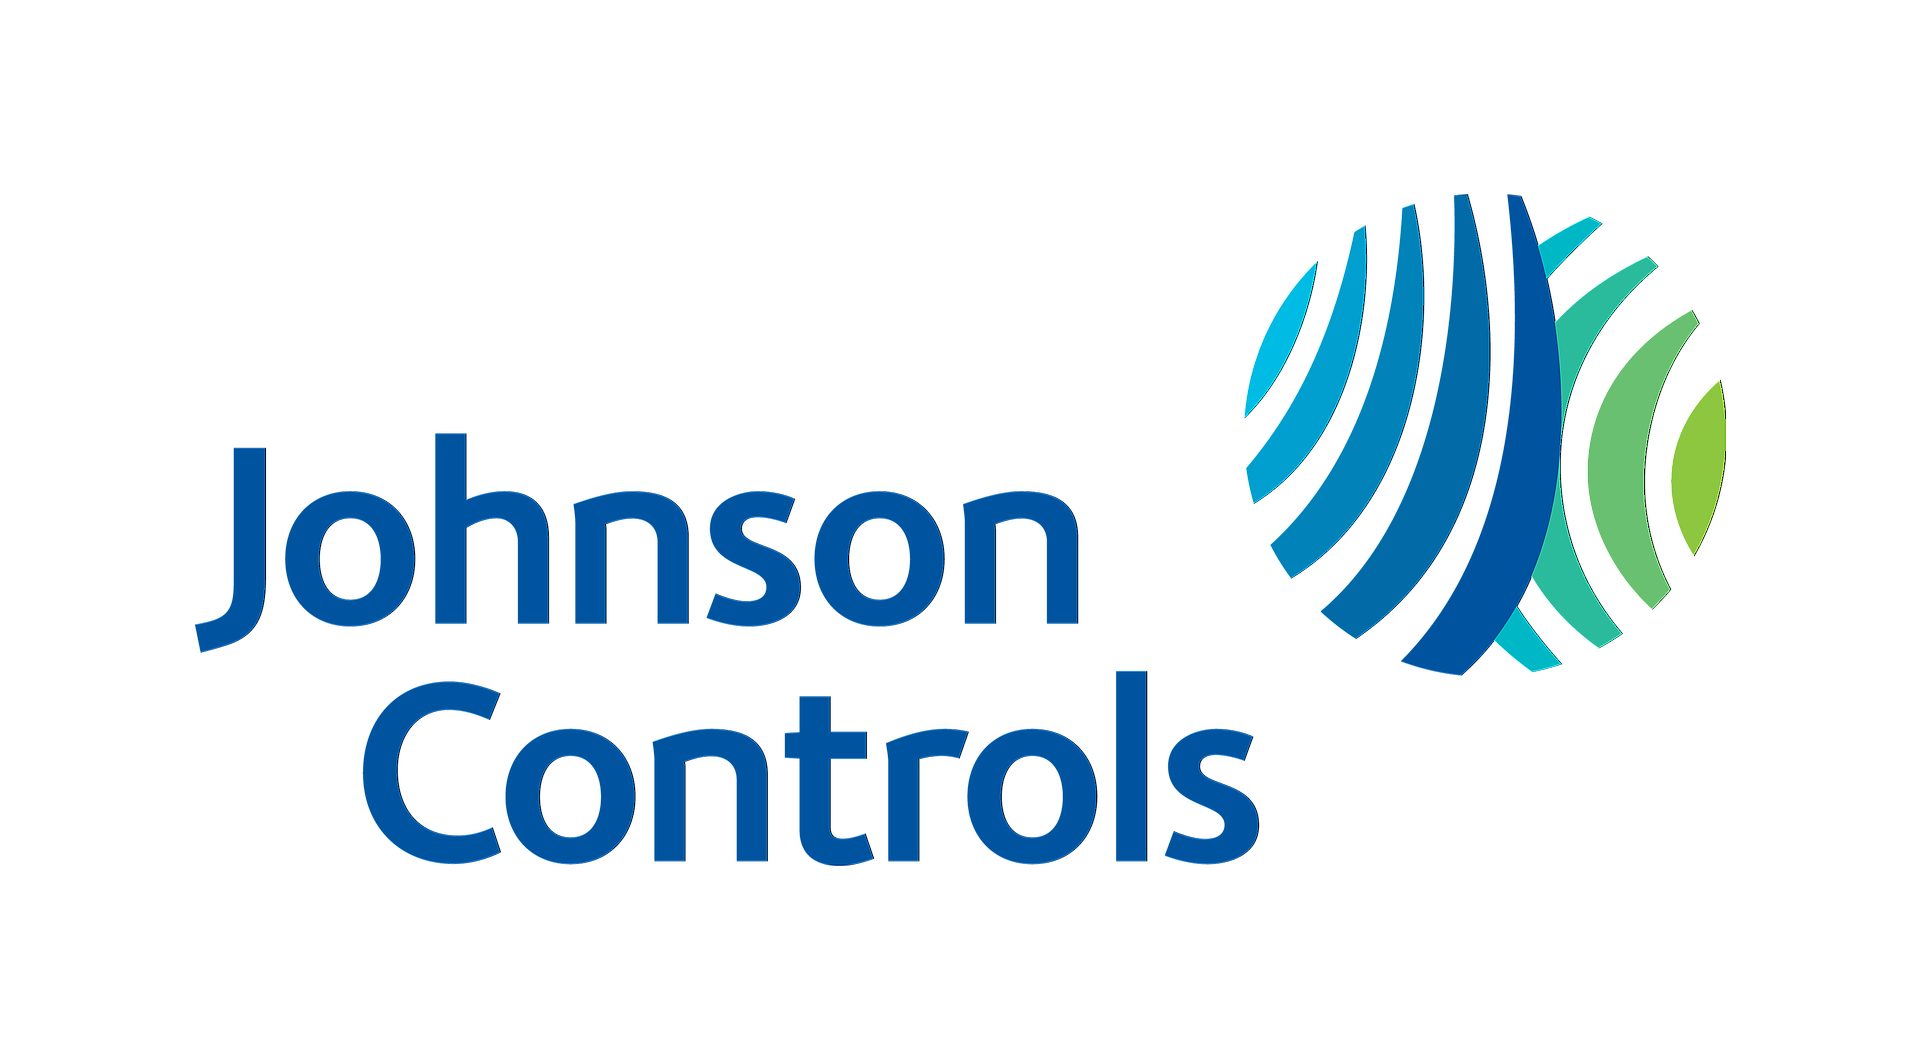 Learn about the Johnson Controls ransomware attack, a cyber crisis with a $51 million demand, DHS concerns, and ongoing repercussions